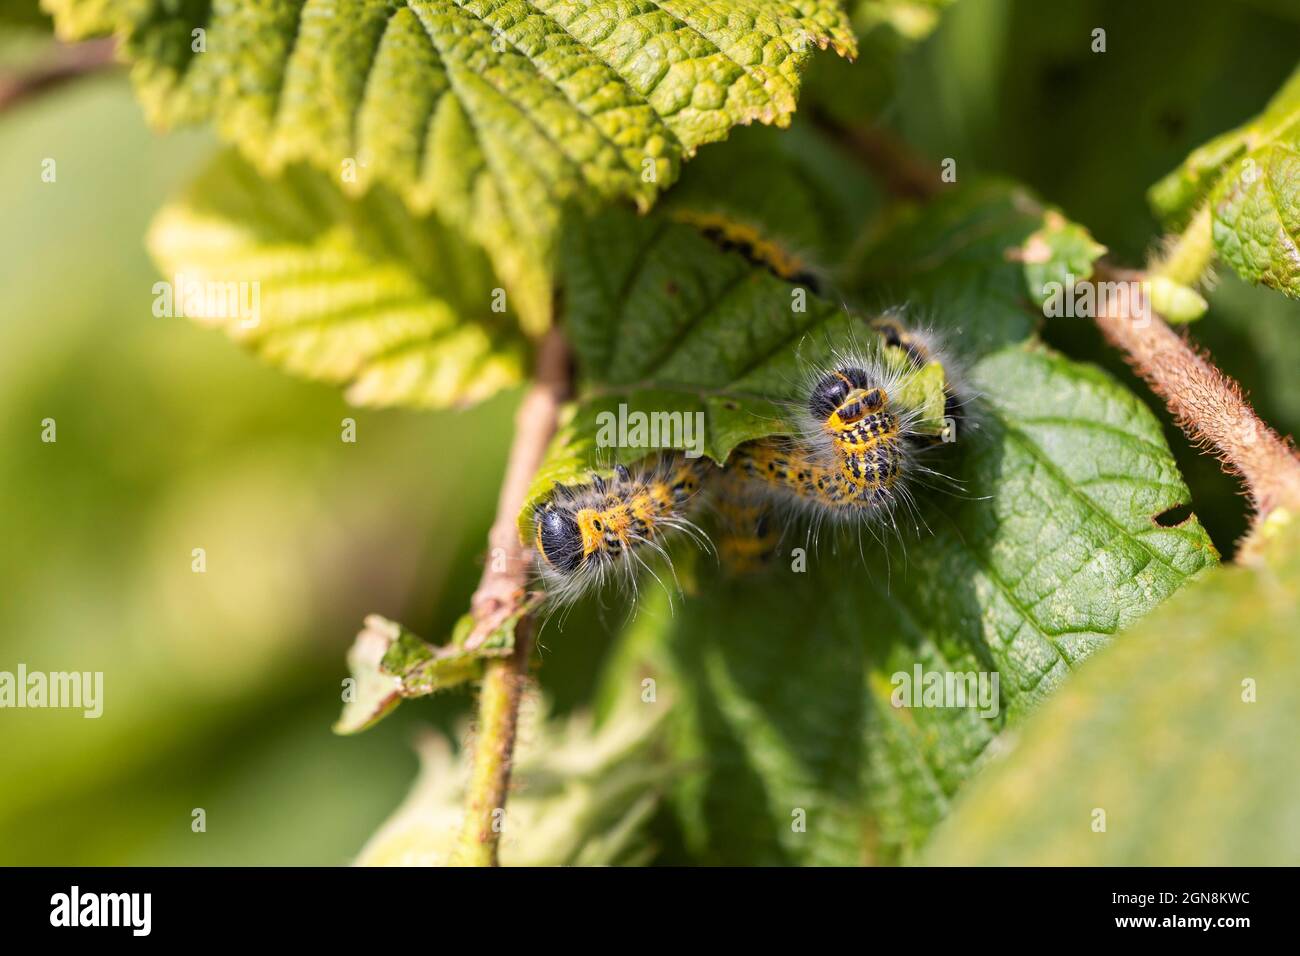 Macro portrait of a group of buff-tip caterpillars sitting and crawling on a leaf of a hazelnut tree. The insect is also called a phalera bucephala an Stock Photo